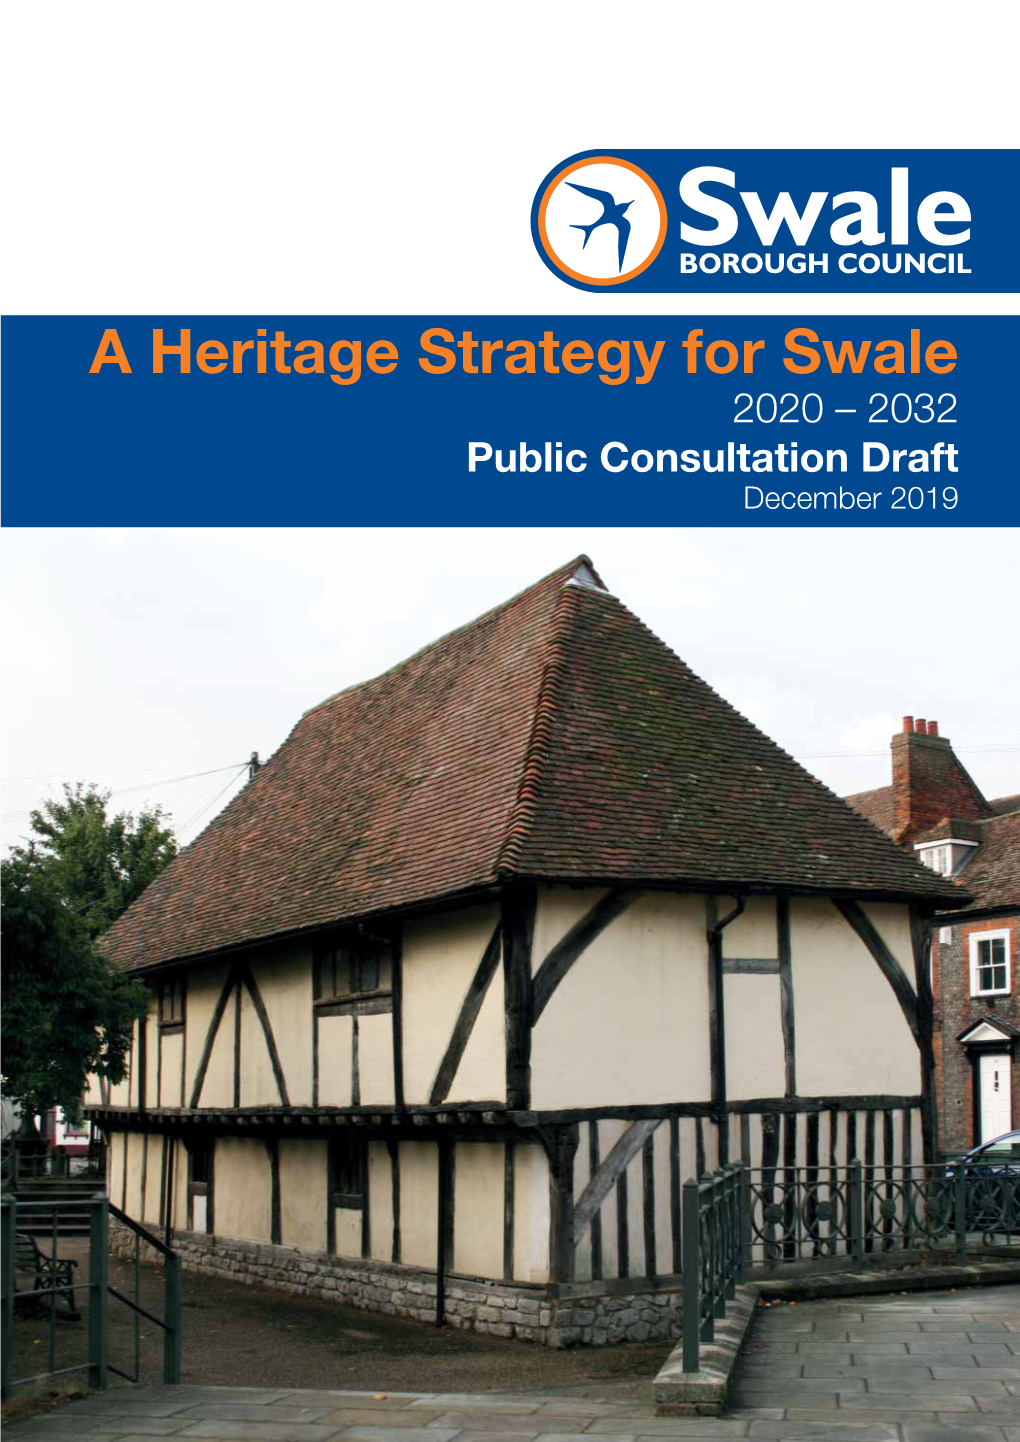 A Heritage Strategy for Swale 2020 – 2032 Public Consultation Draft December 2019